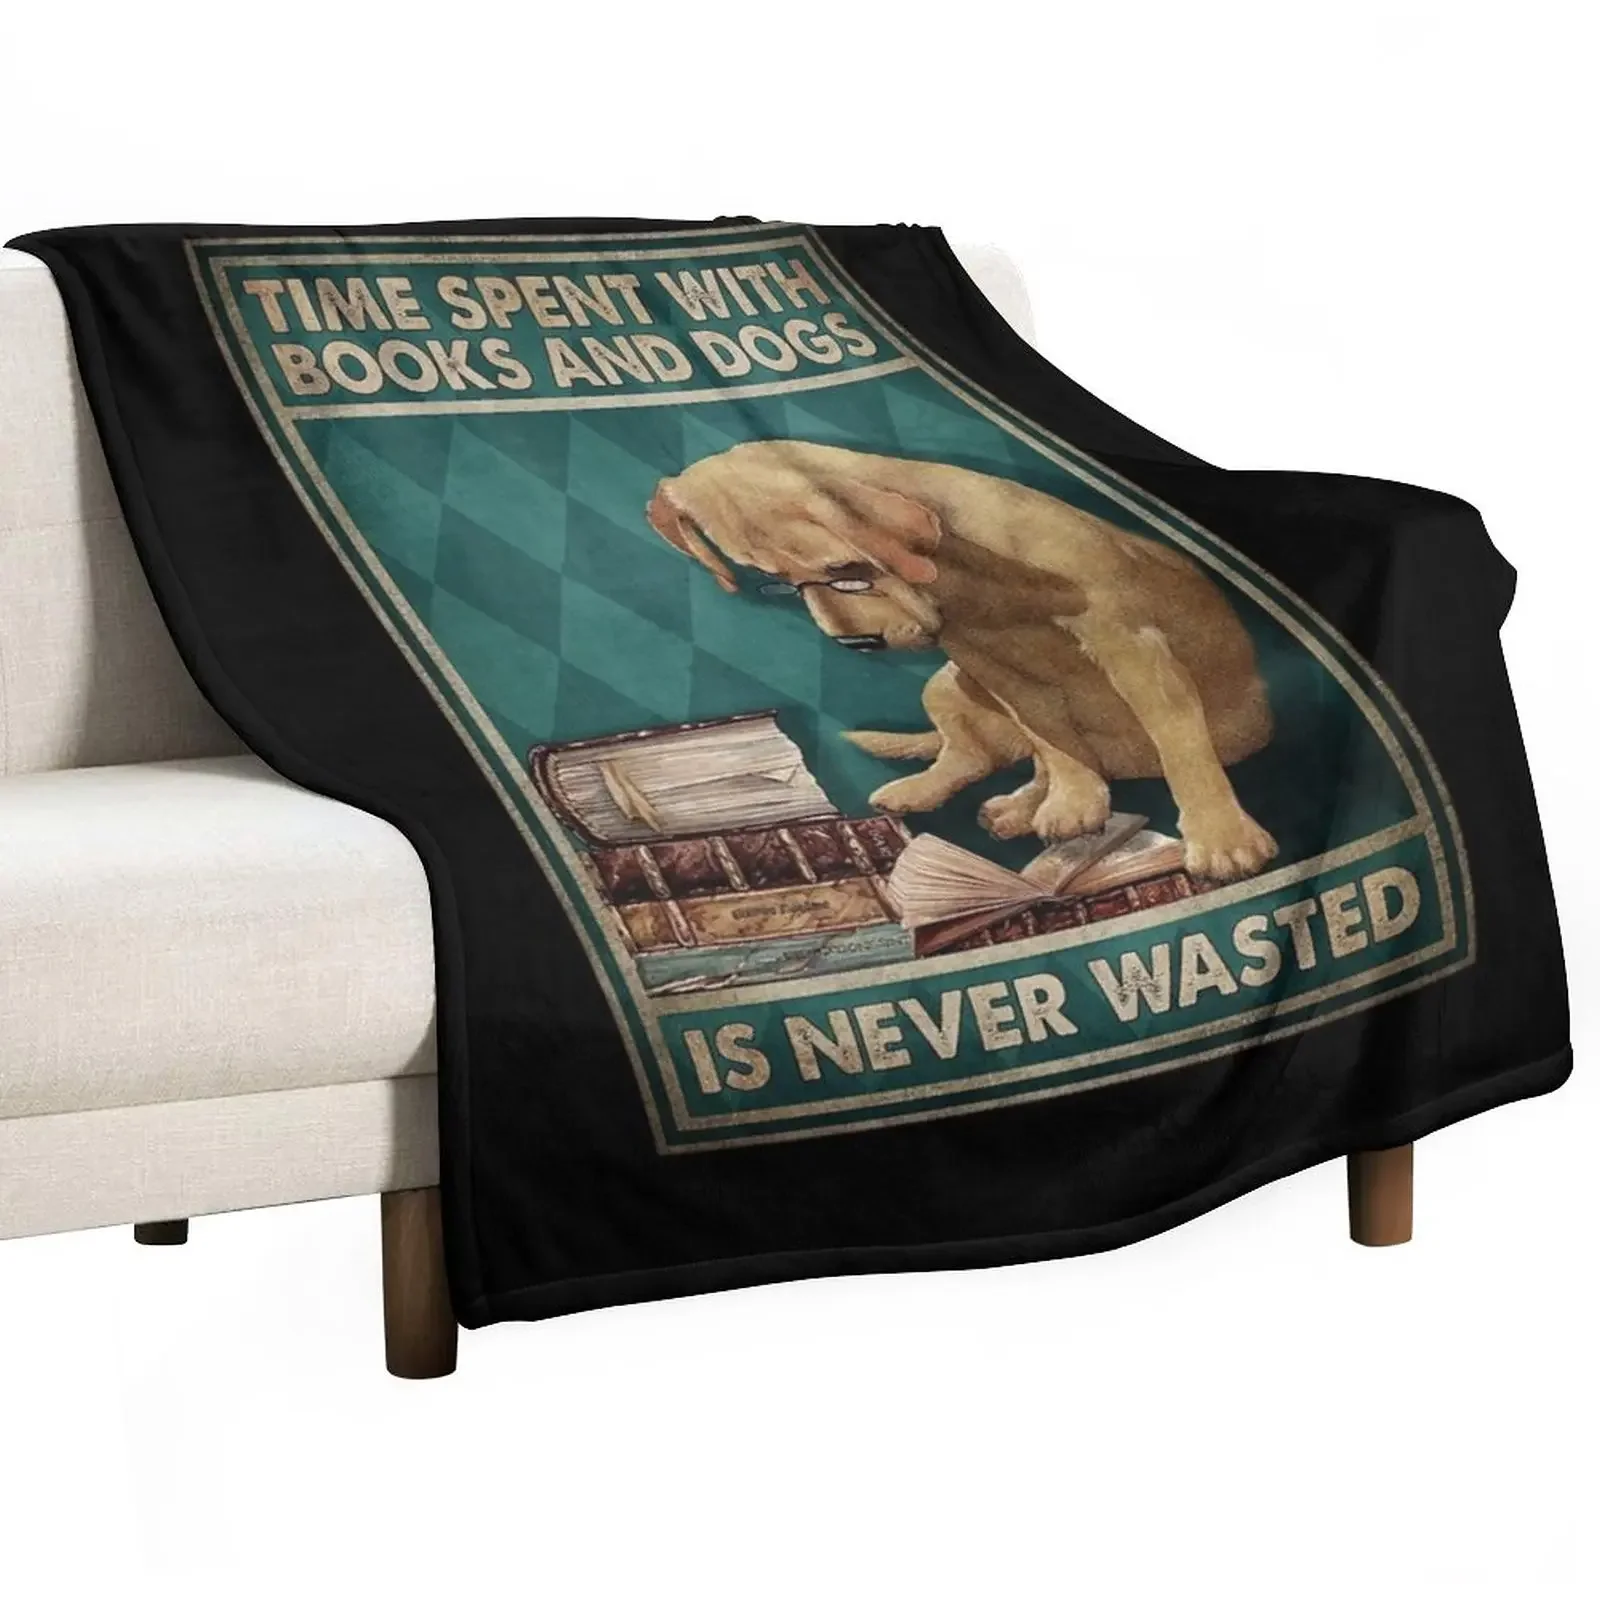 

Time spent with books and dogs is never wasted dog lover Throw Blanket for babies Thermal Blankets